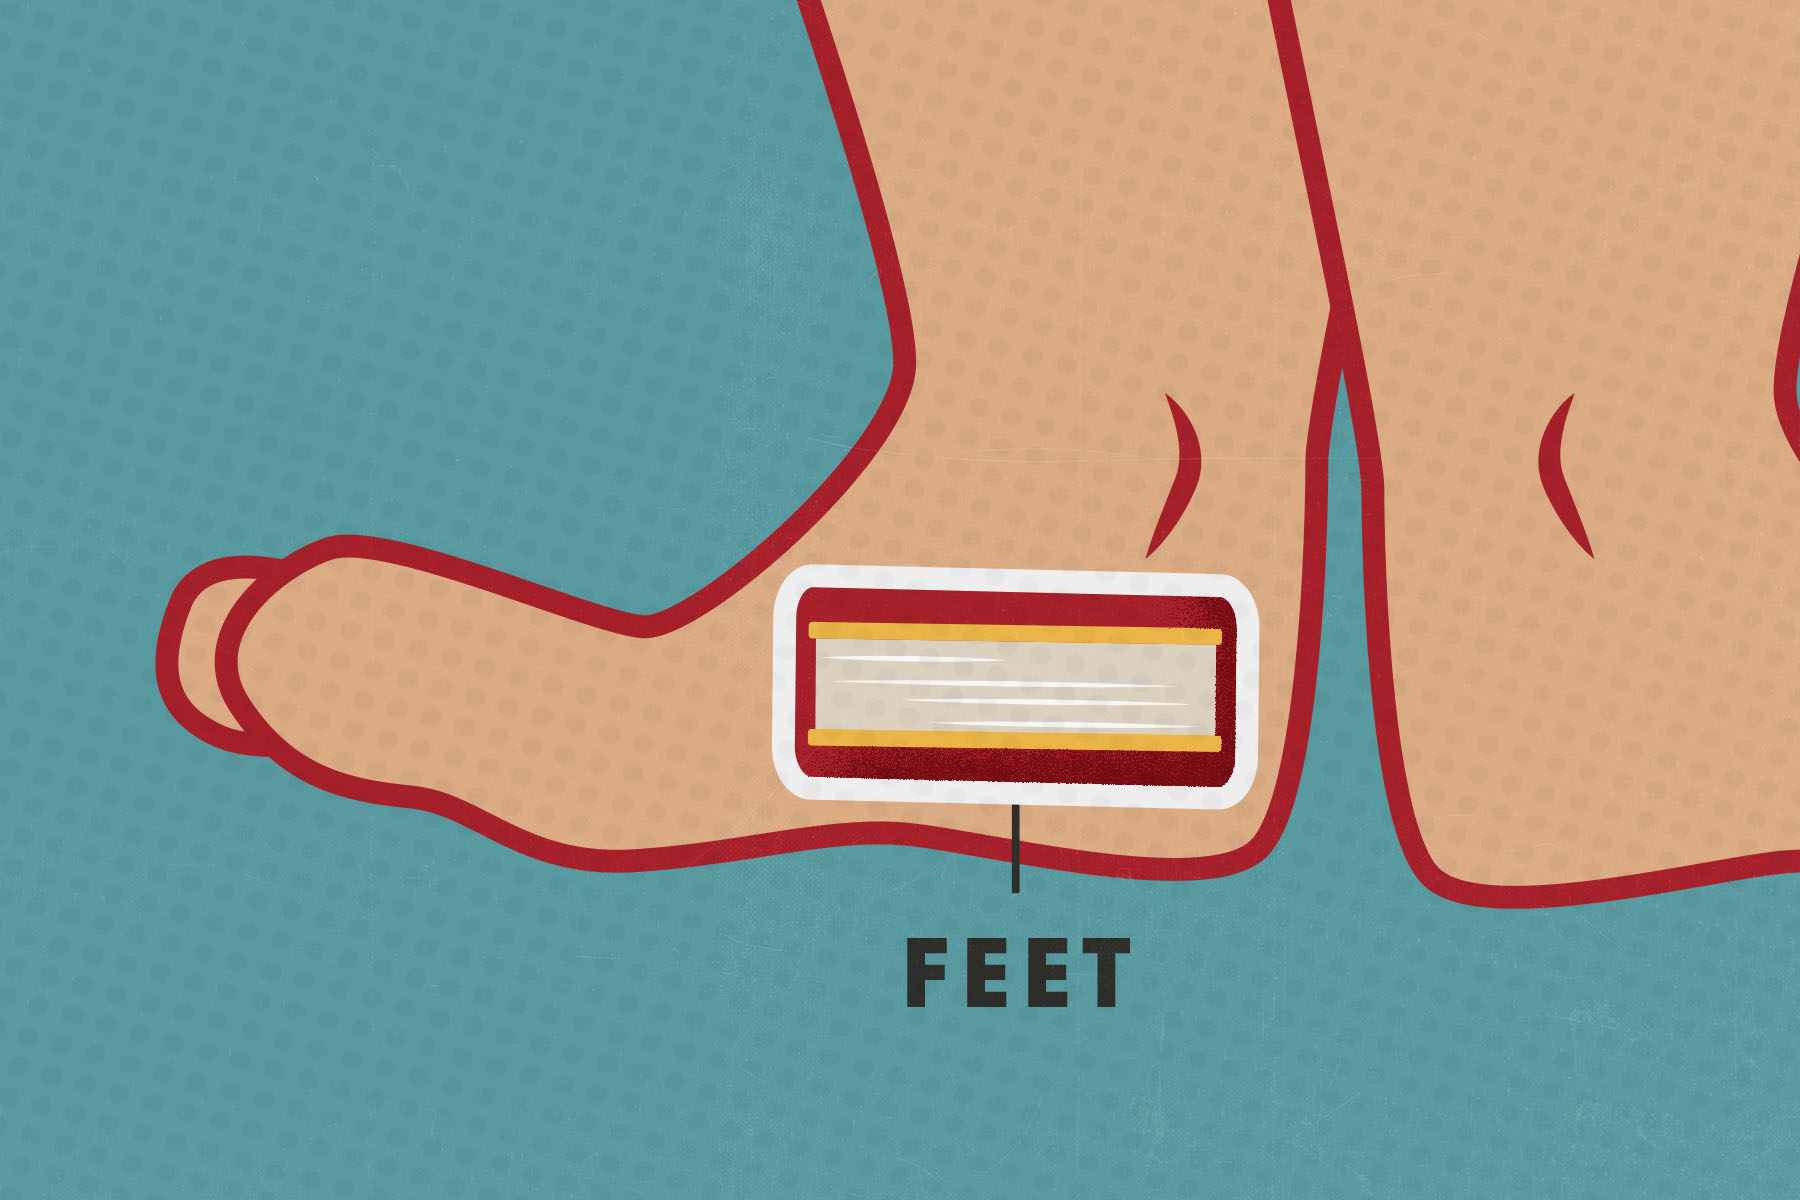 A boardgame-style illustration of a book in a foot